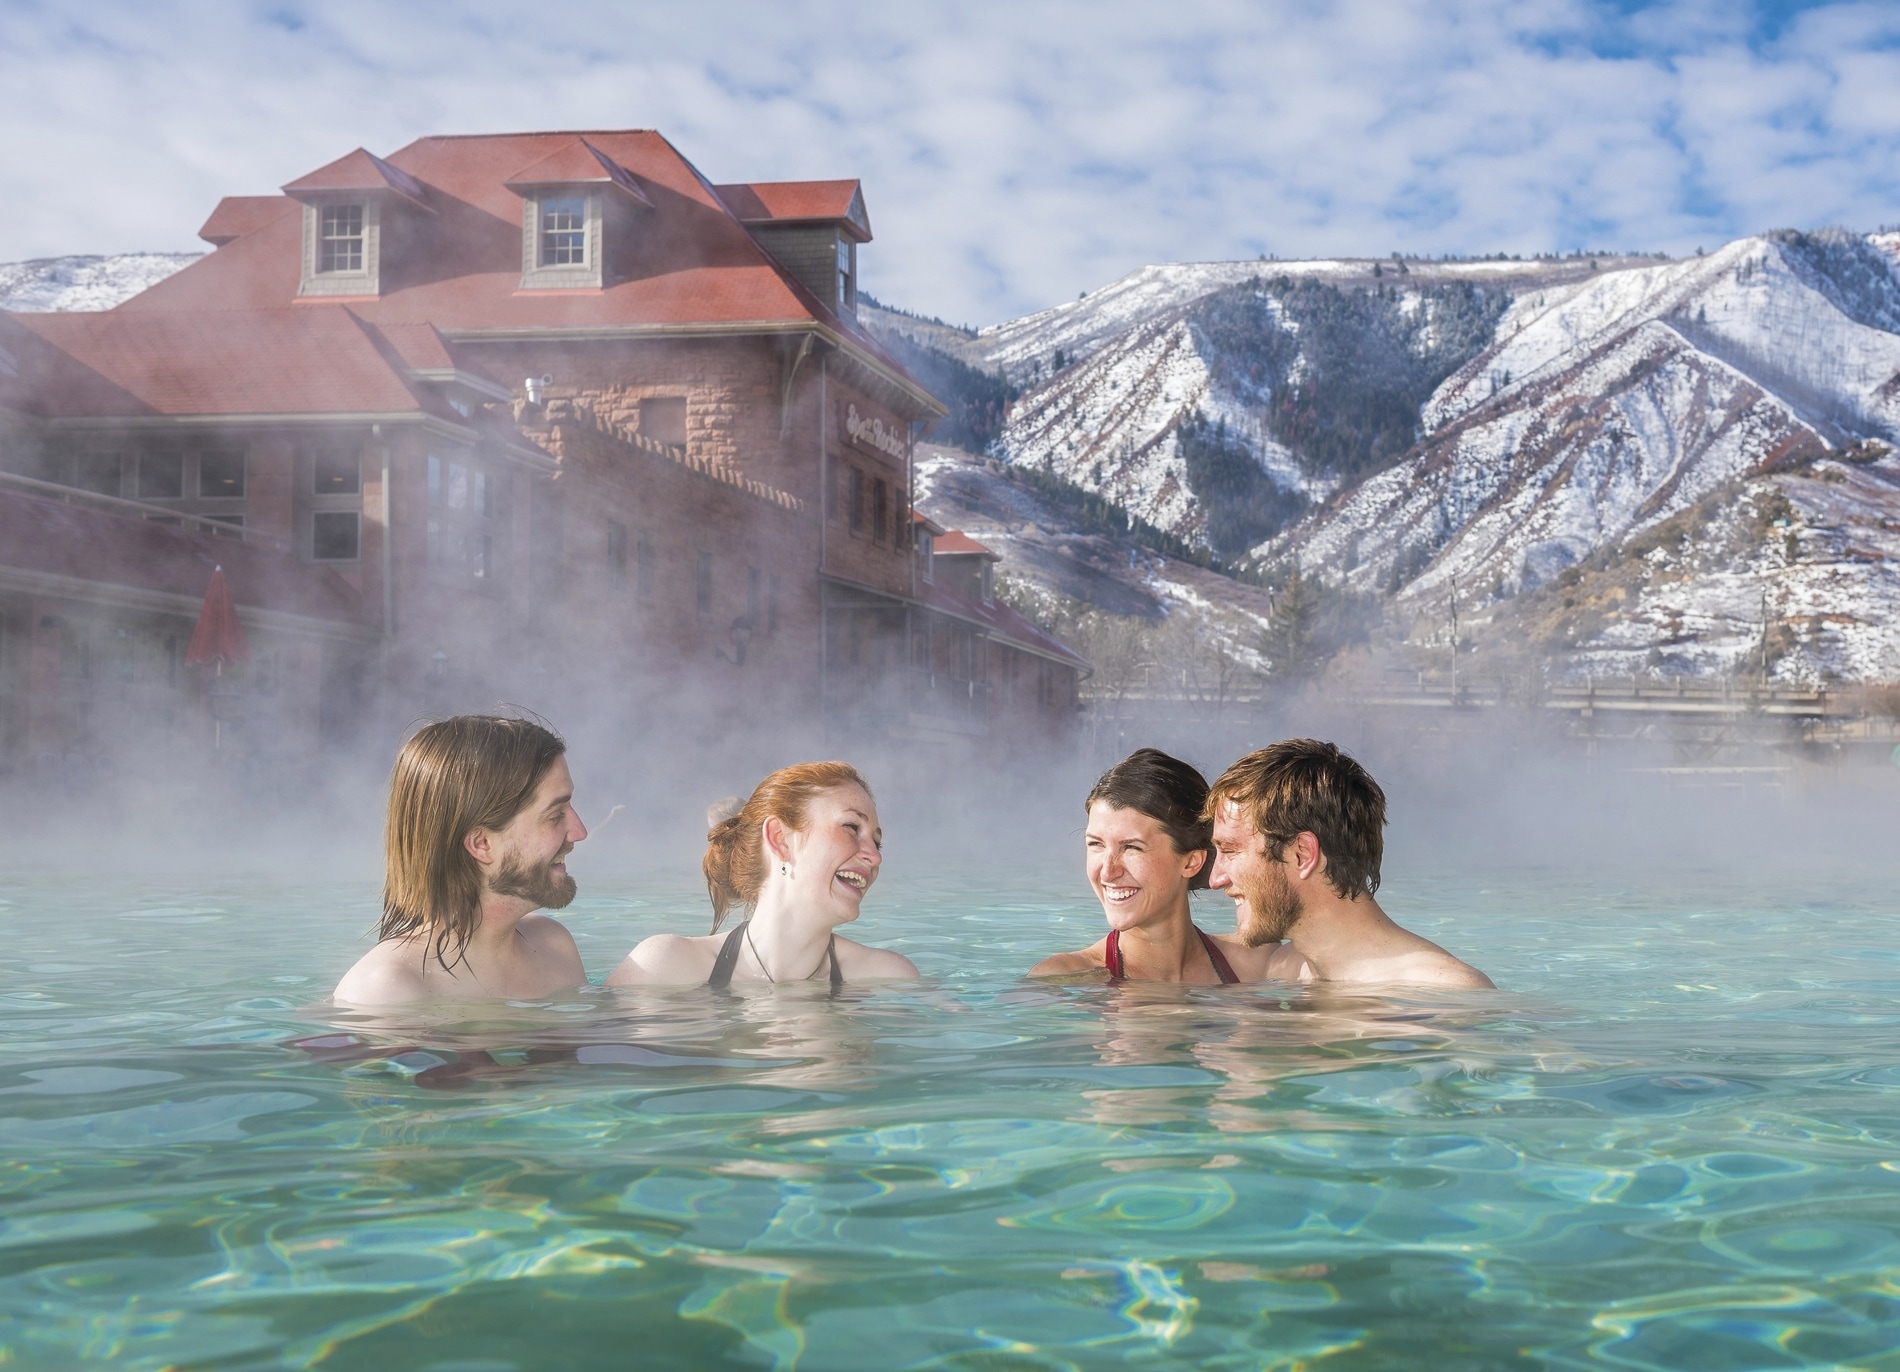 Find Hot Springs And Hiking Trails In Glenwood Springs.